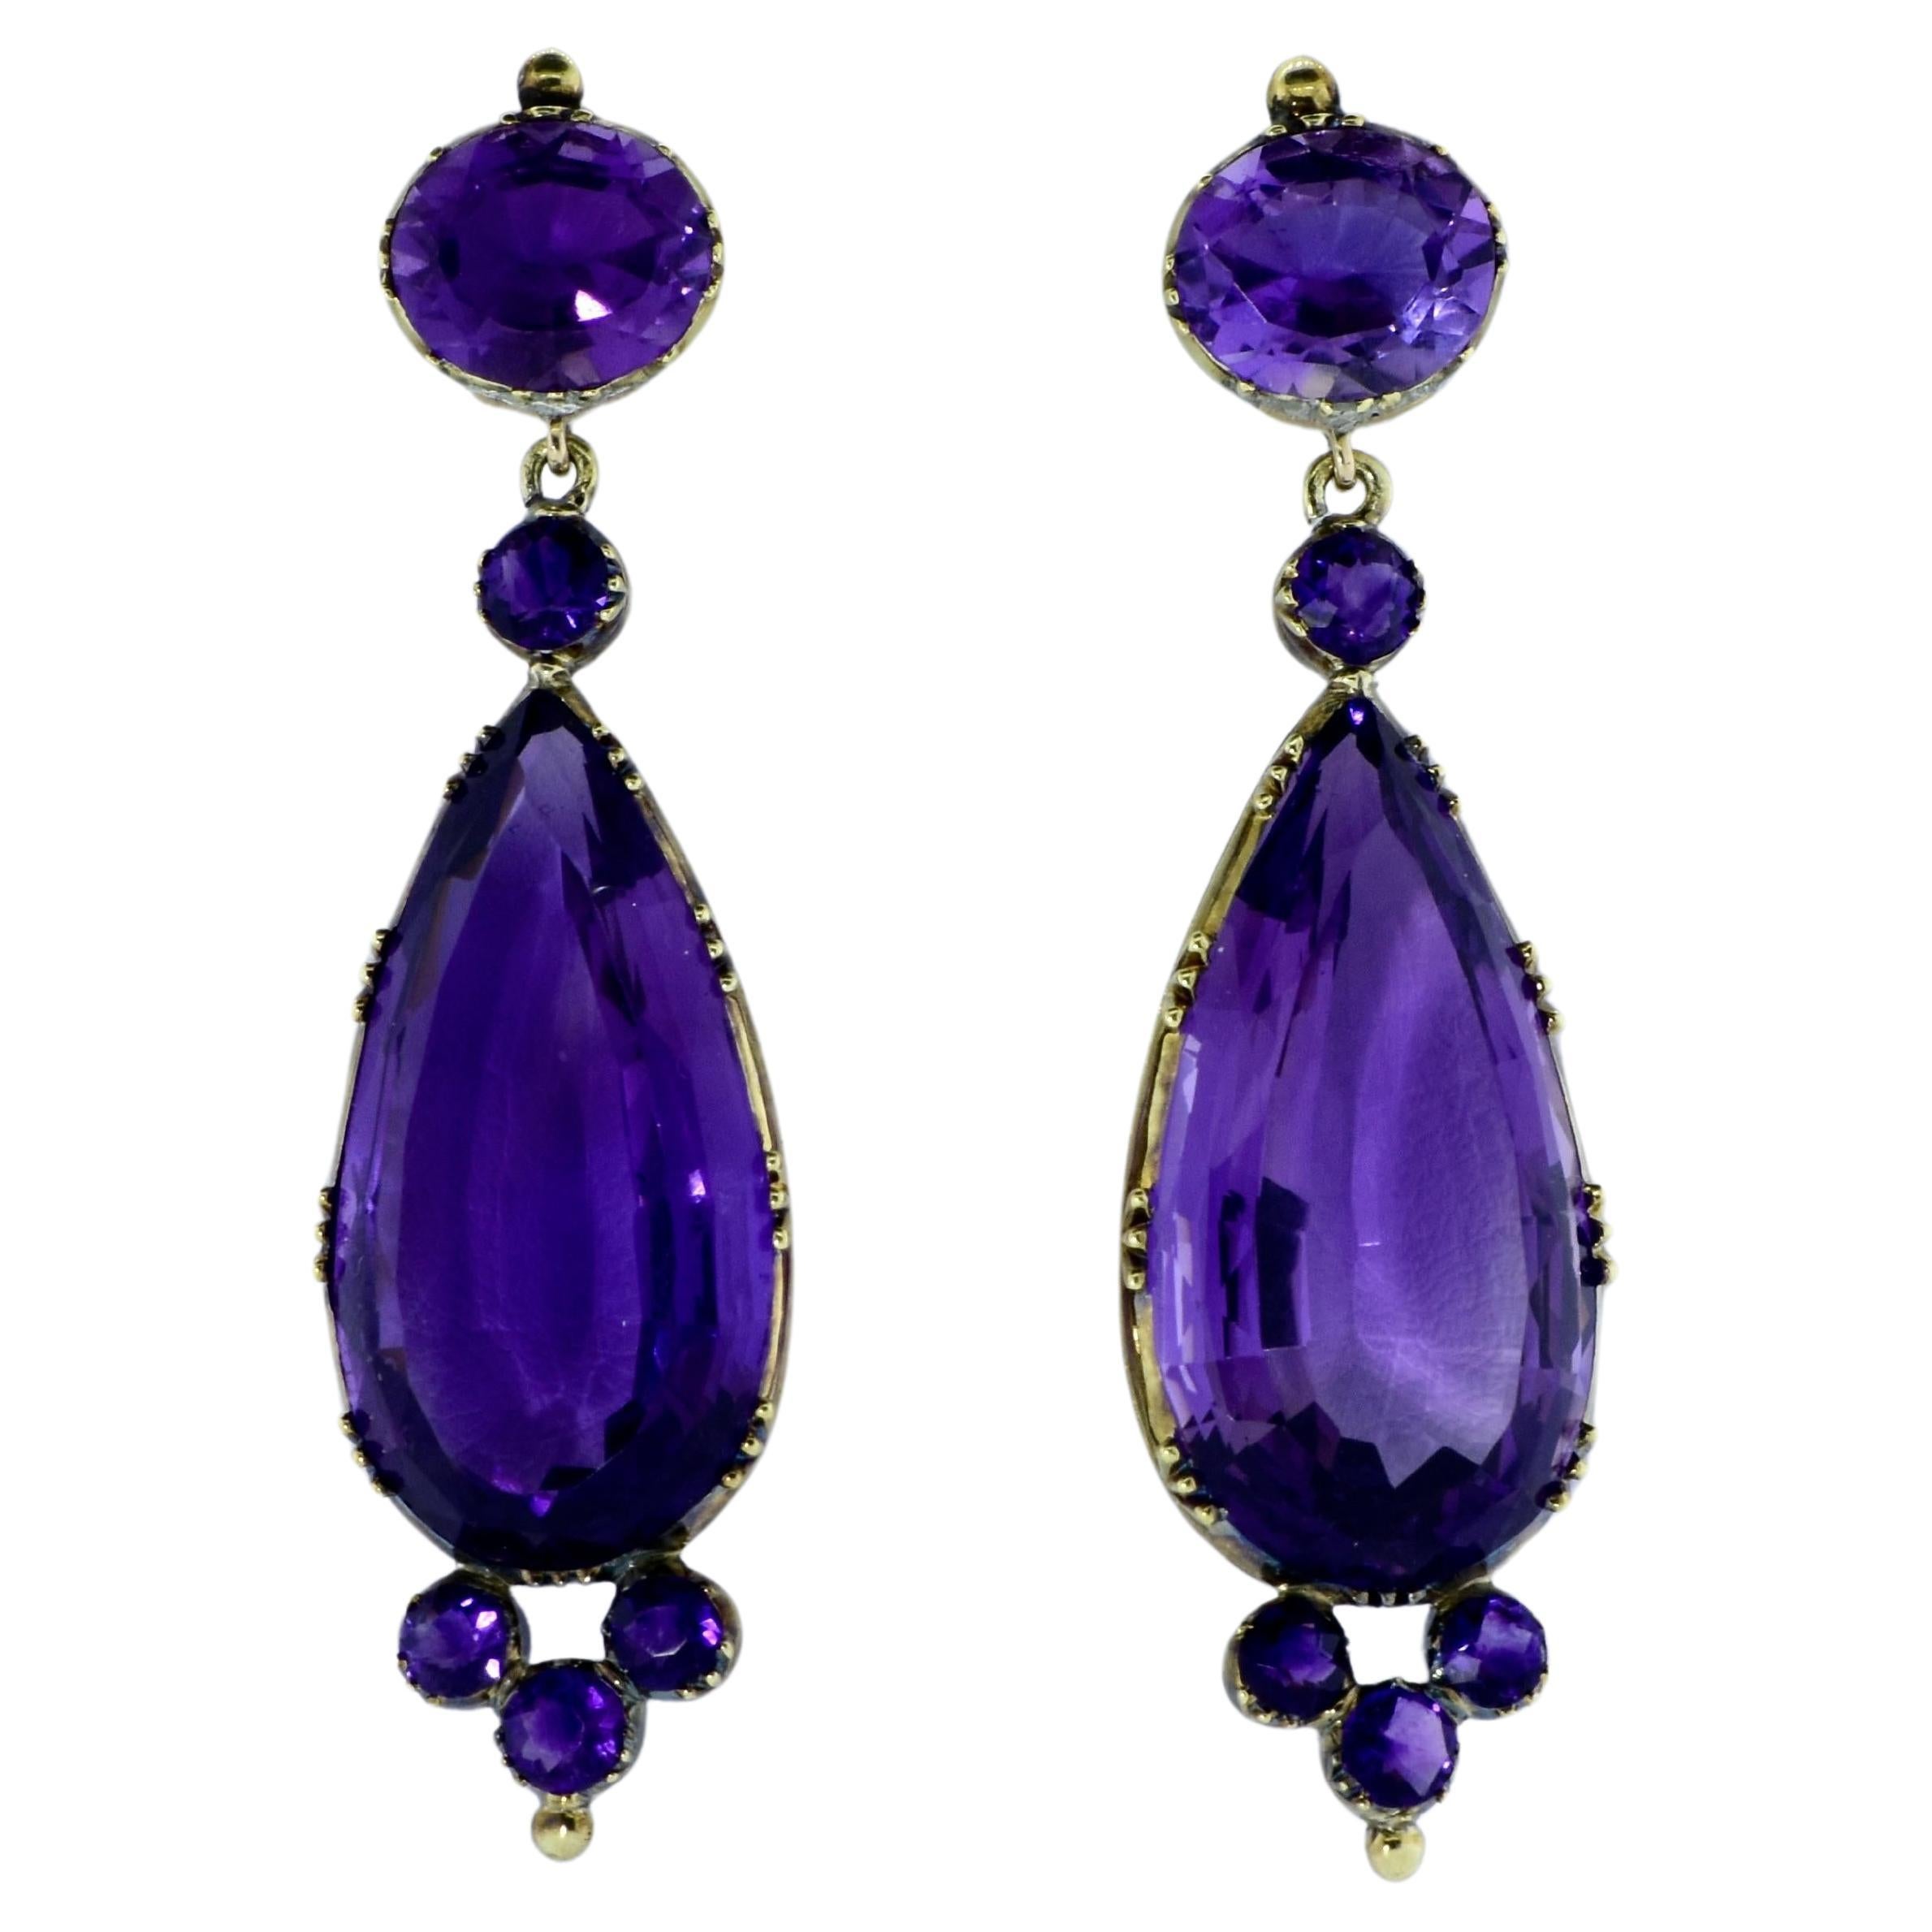 Antique Long Pendant Earrings with Fine Amethysts in Yellow Gold c. 1880. For Sale